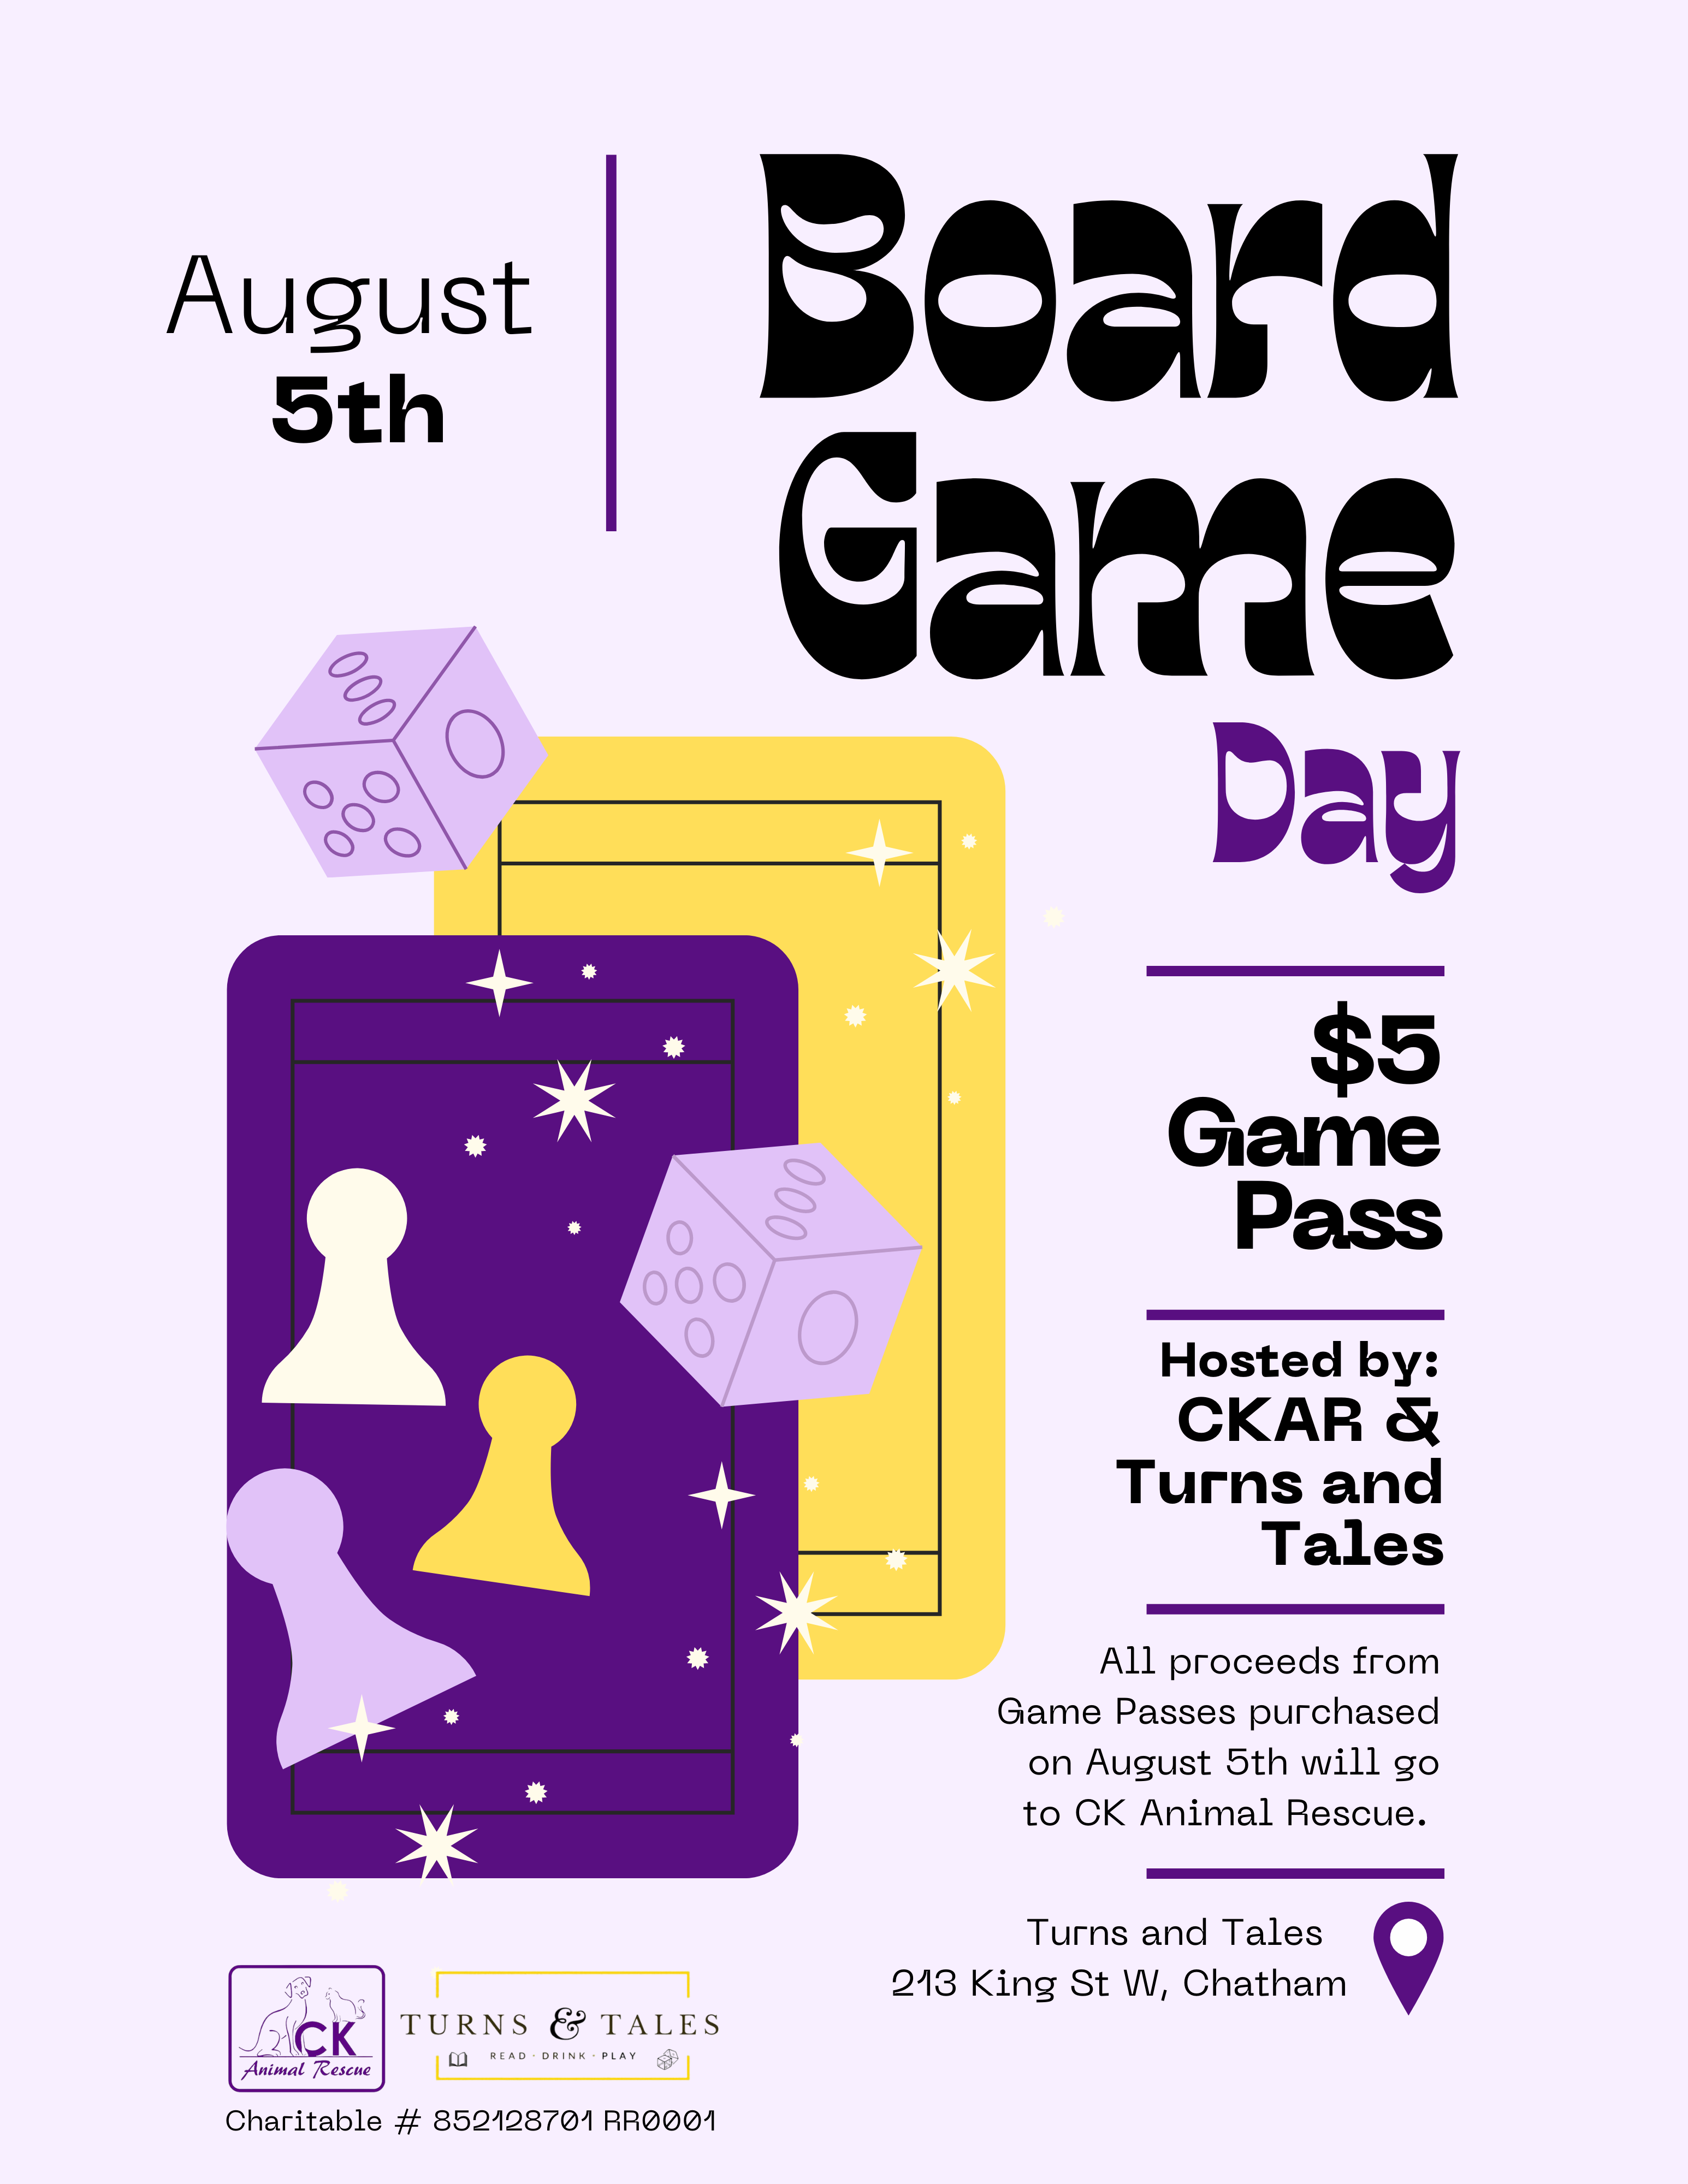 Flyer explaining the Board Game Day Event